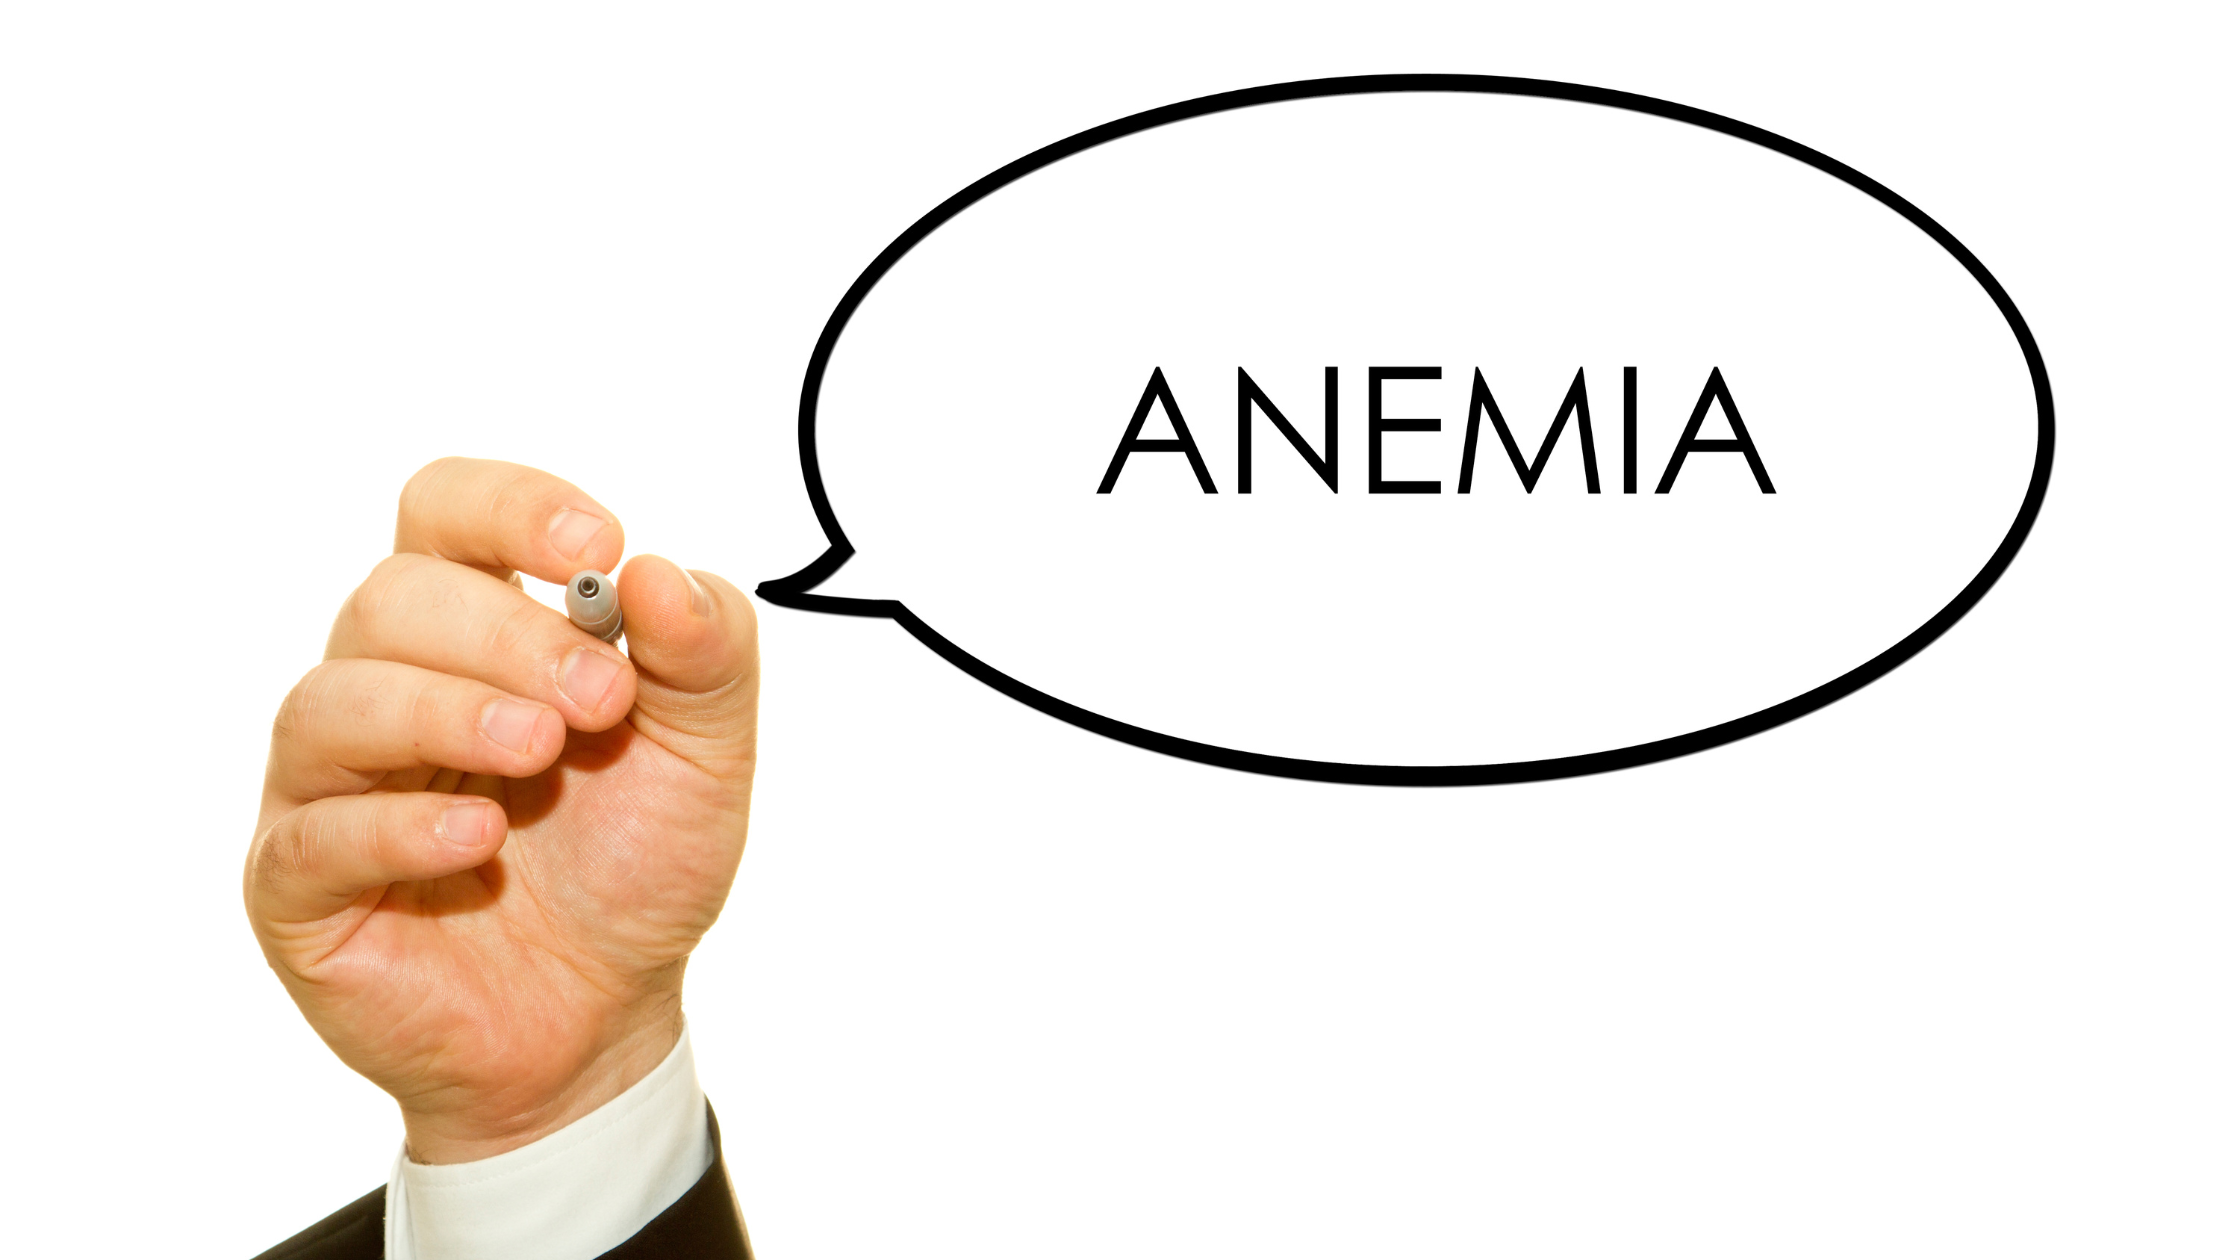 hand pointing to a text bubble that says "anemia"